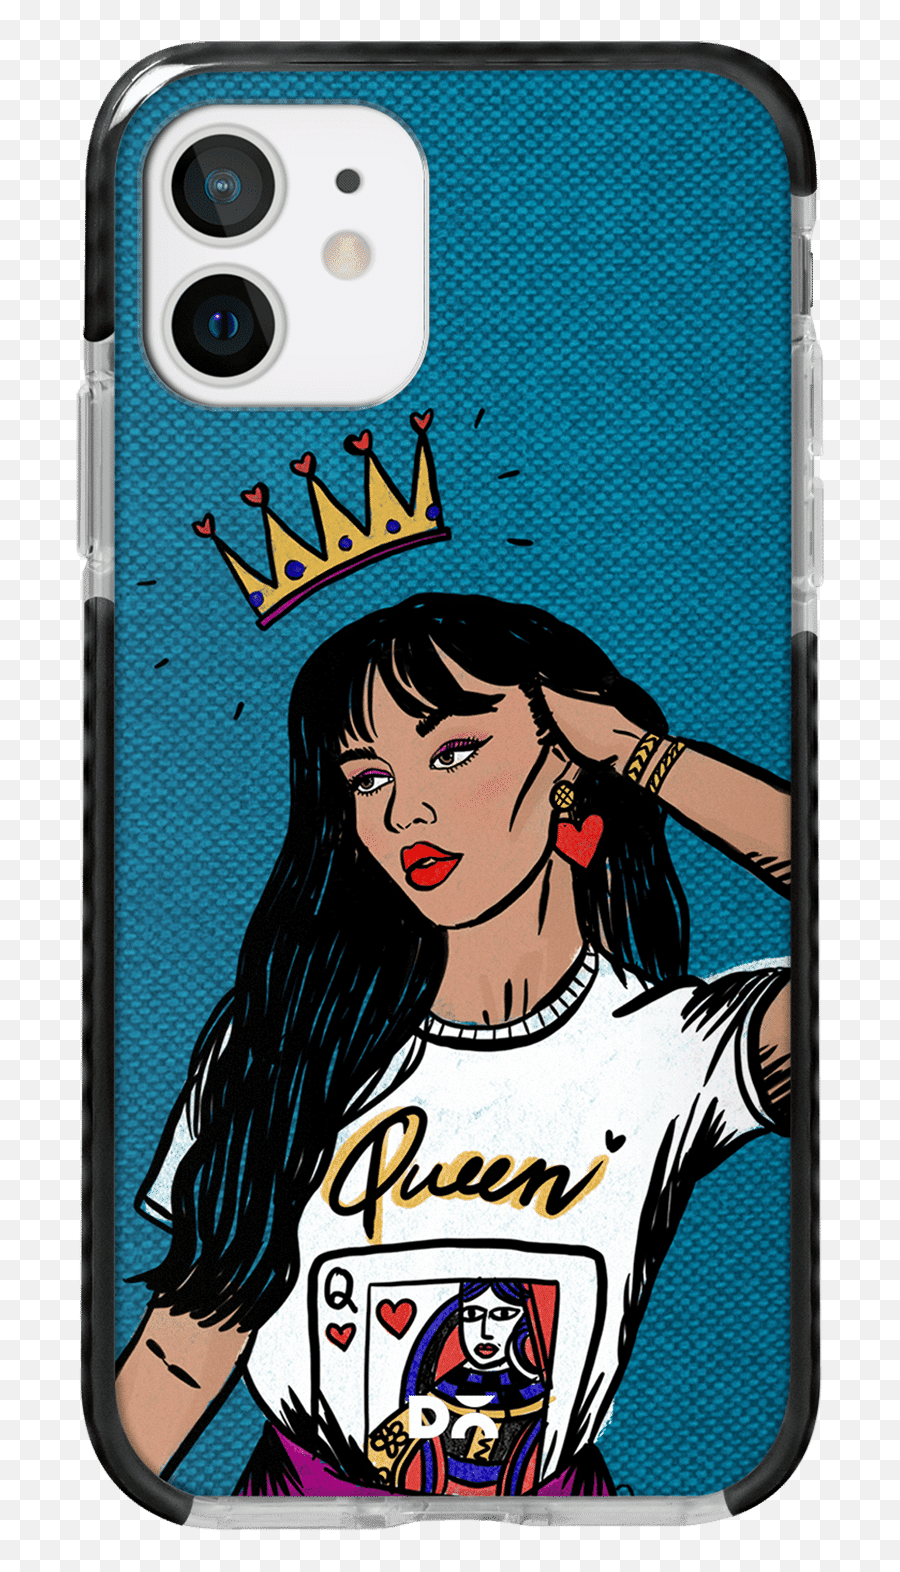 Iphone 11 Covers - Buy Apple Iphone 11 Cases Online At Best Iphone Xr Back Cover For Girls Emoji,Alien Emoji Iphone 5s Case